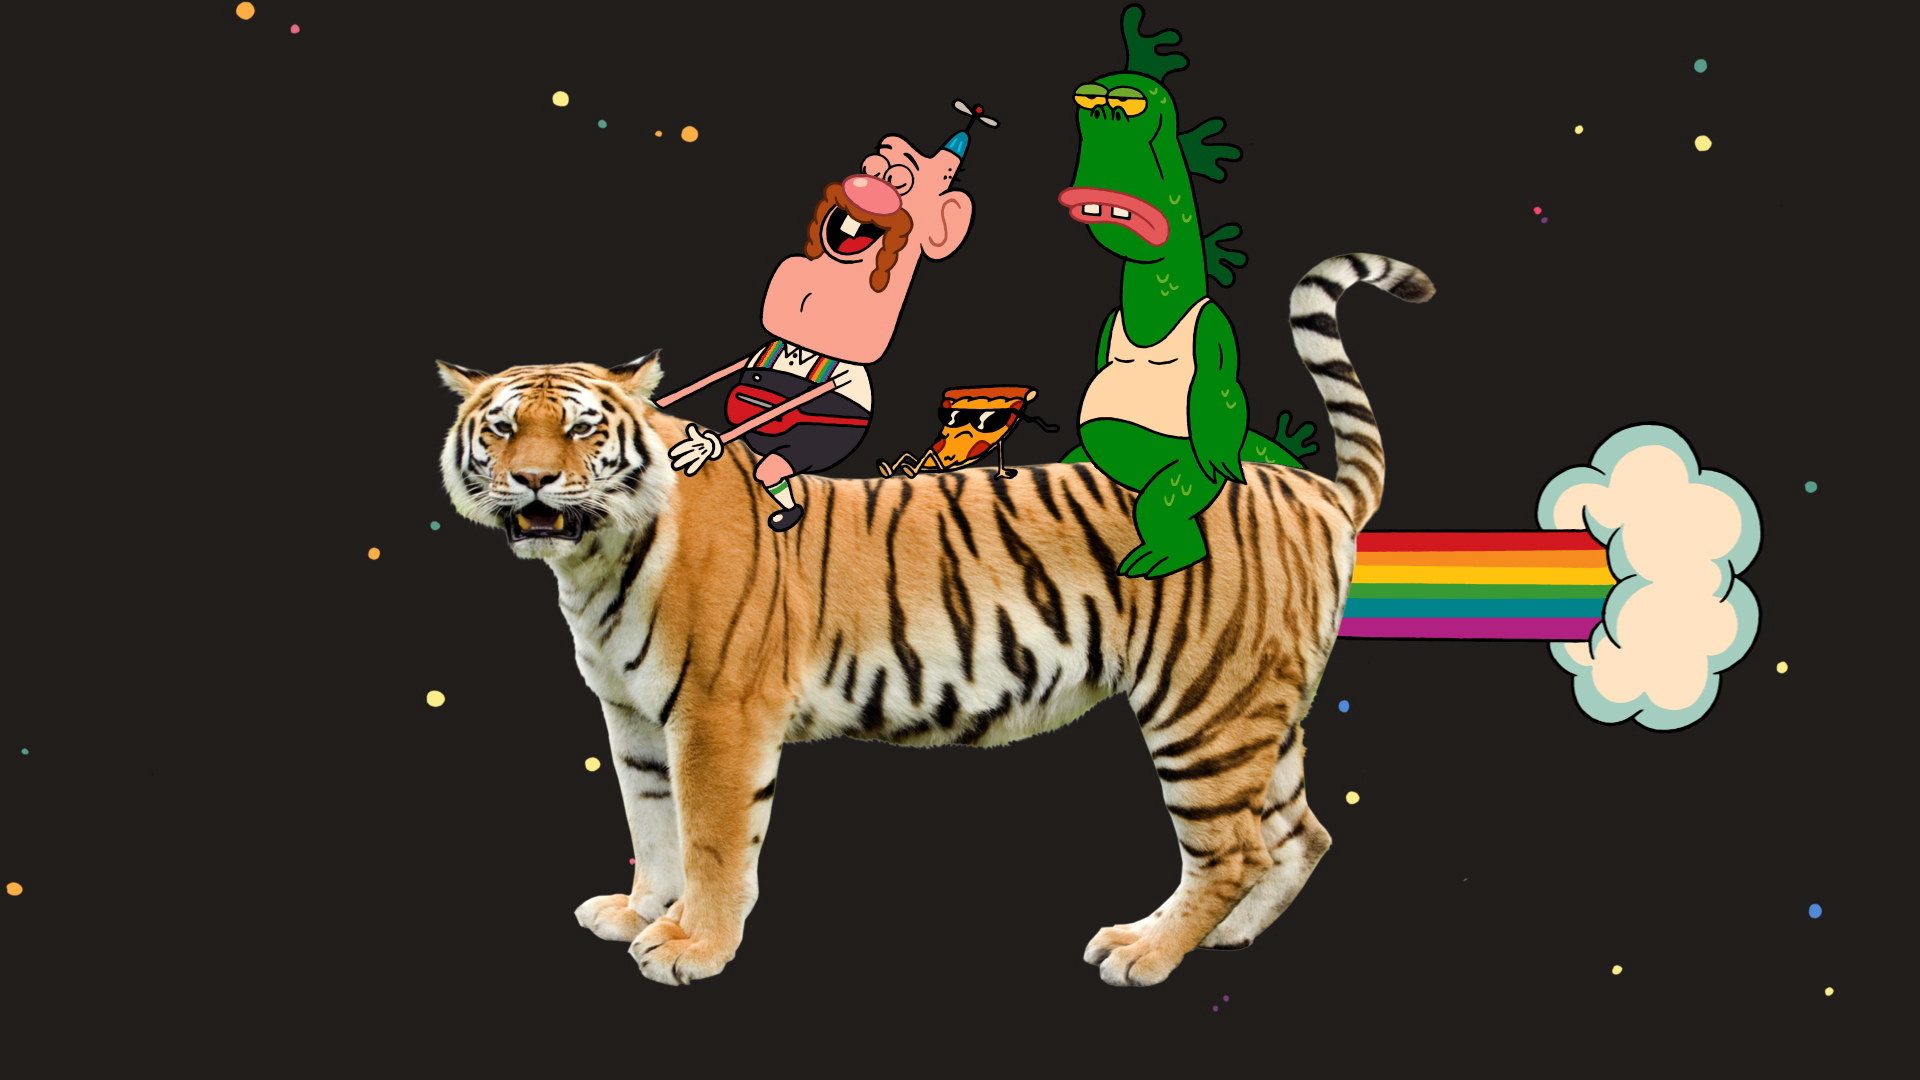 Porn Uncle Grandpa Characters - 31 Best Cartoon Network Shows Of All Time